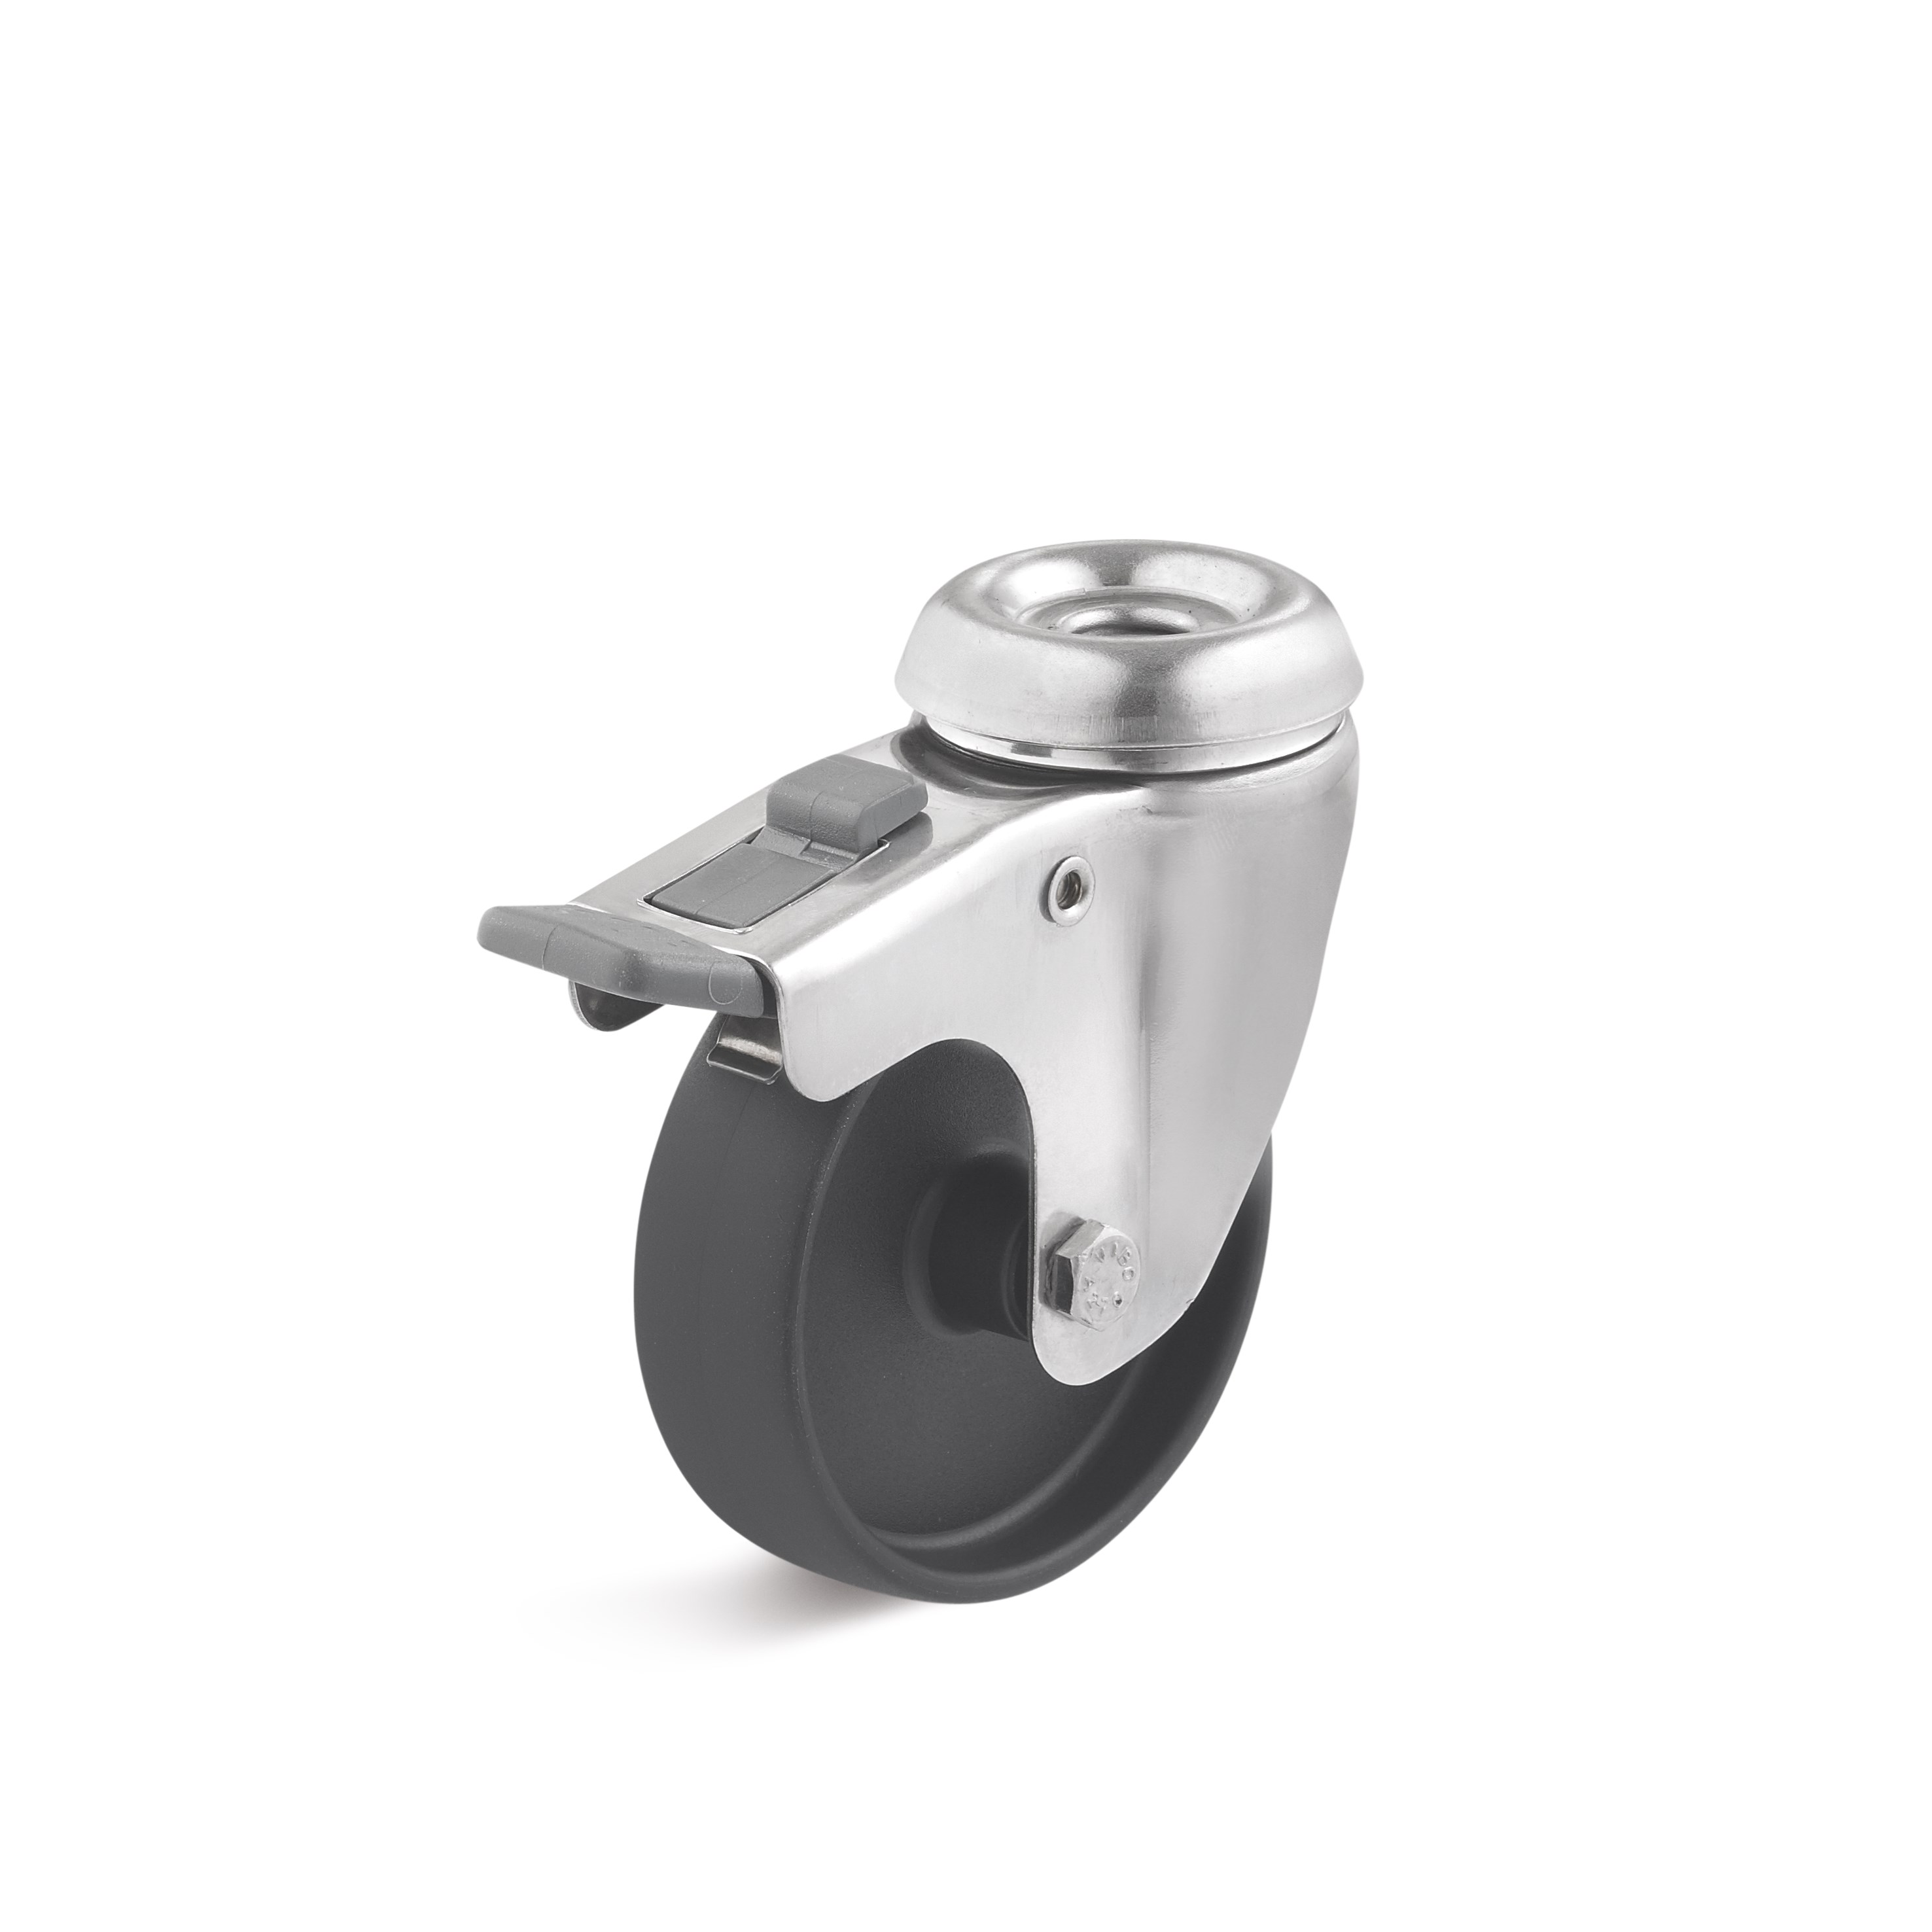 Stainless steel swivel castor with double stop, rear hole attachment, polyamide wheel